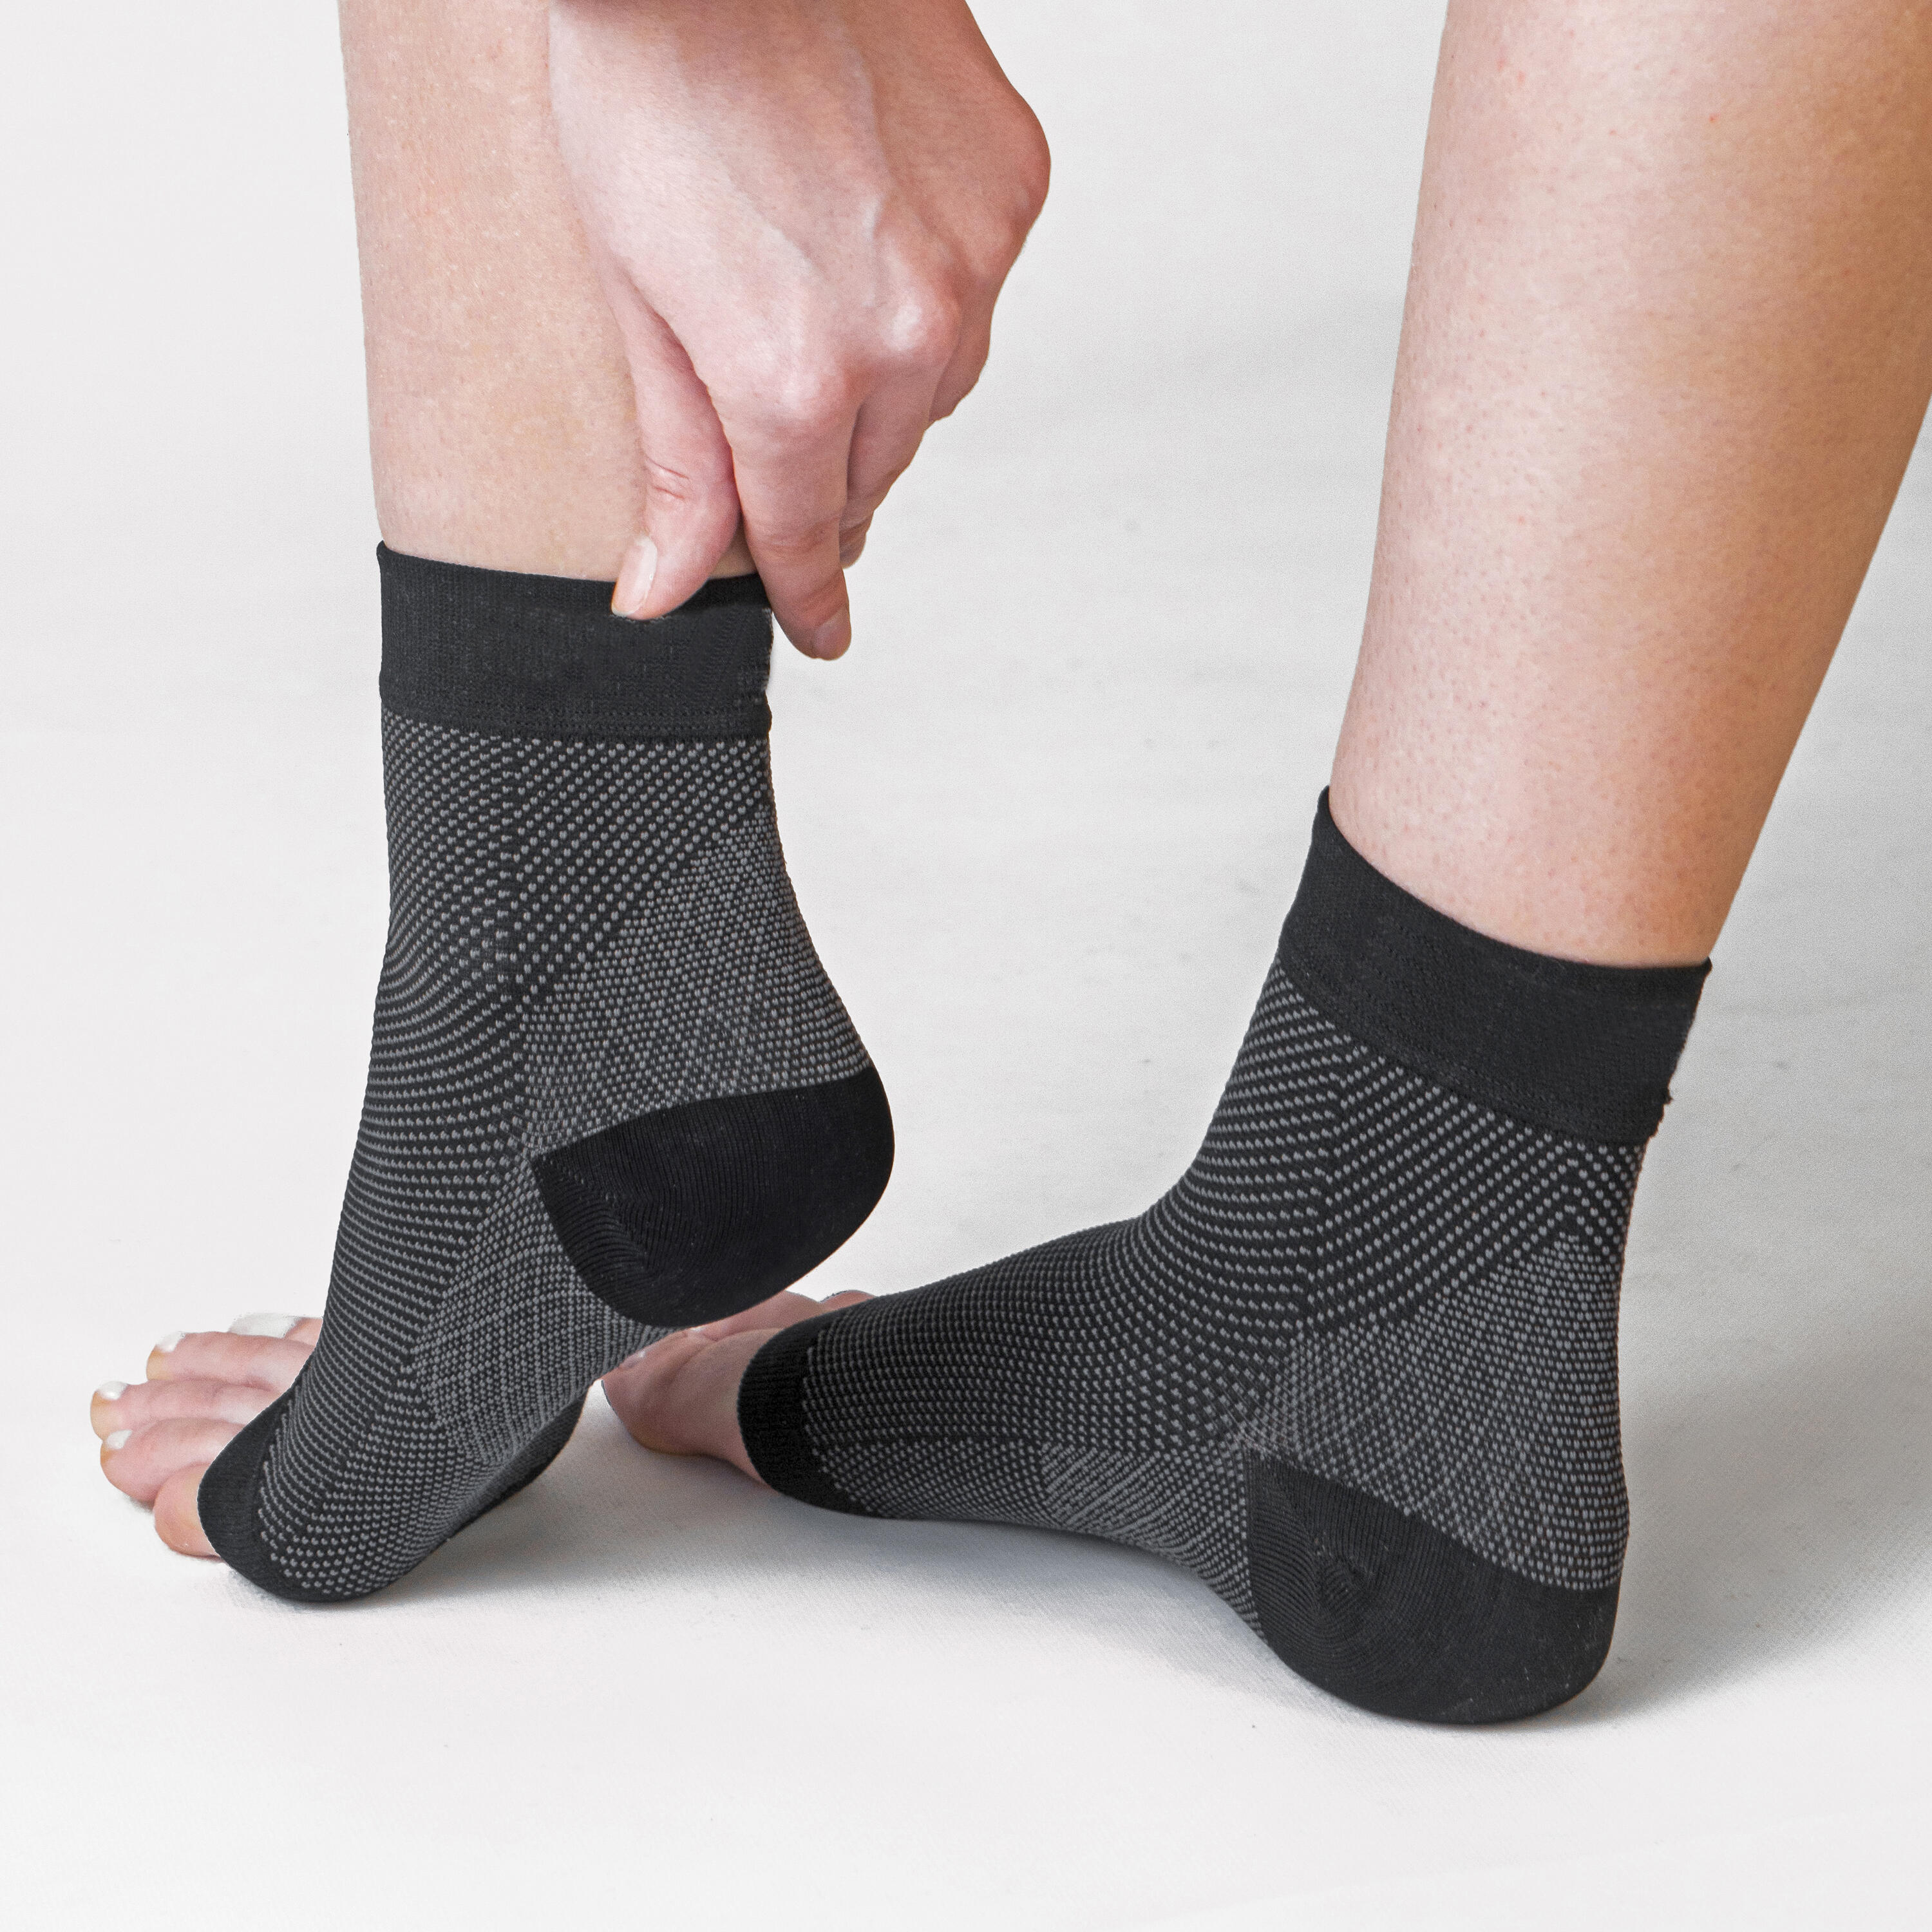 Ankle Foot Support Compression Brace, Plantar Fasciitis Socks (2 Pairs) 5/6